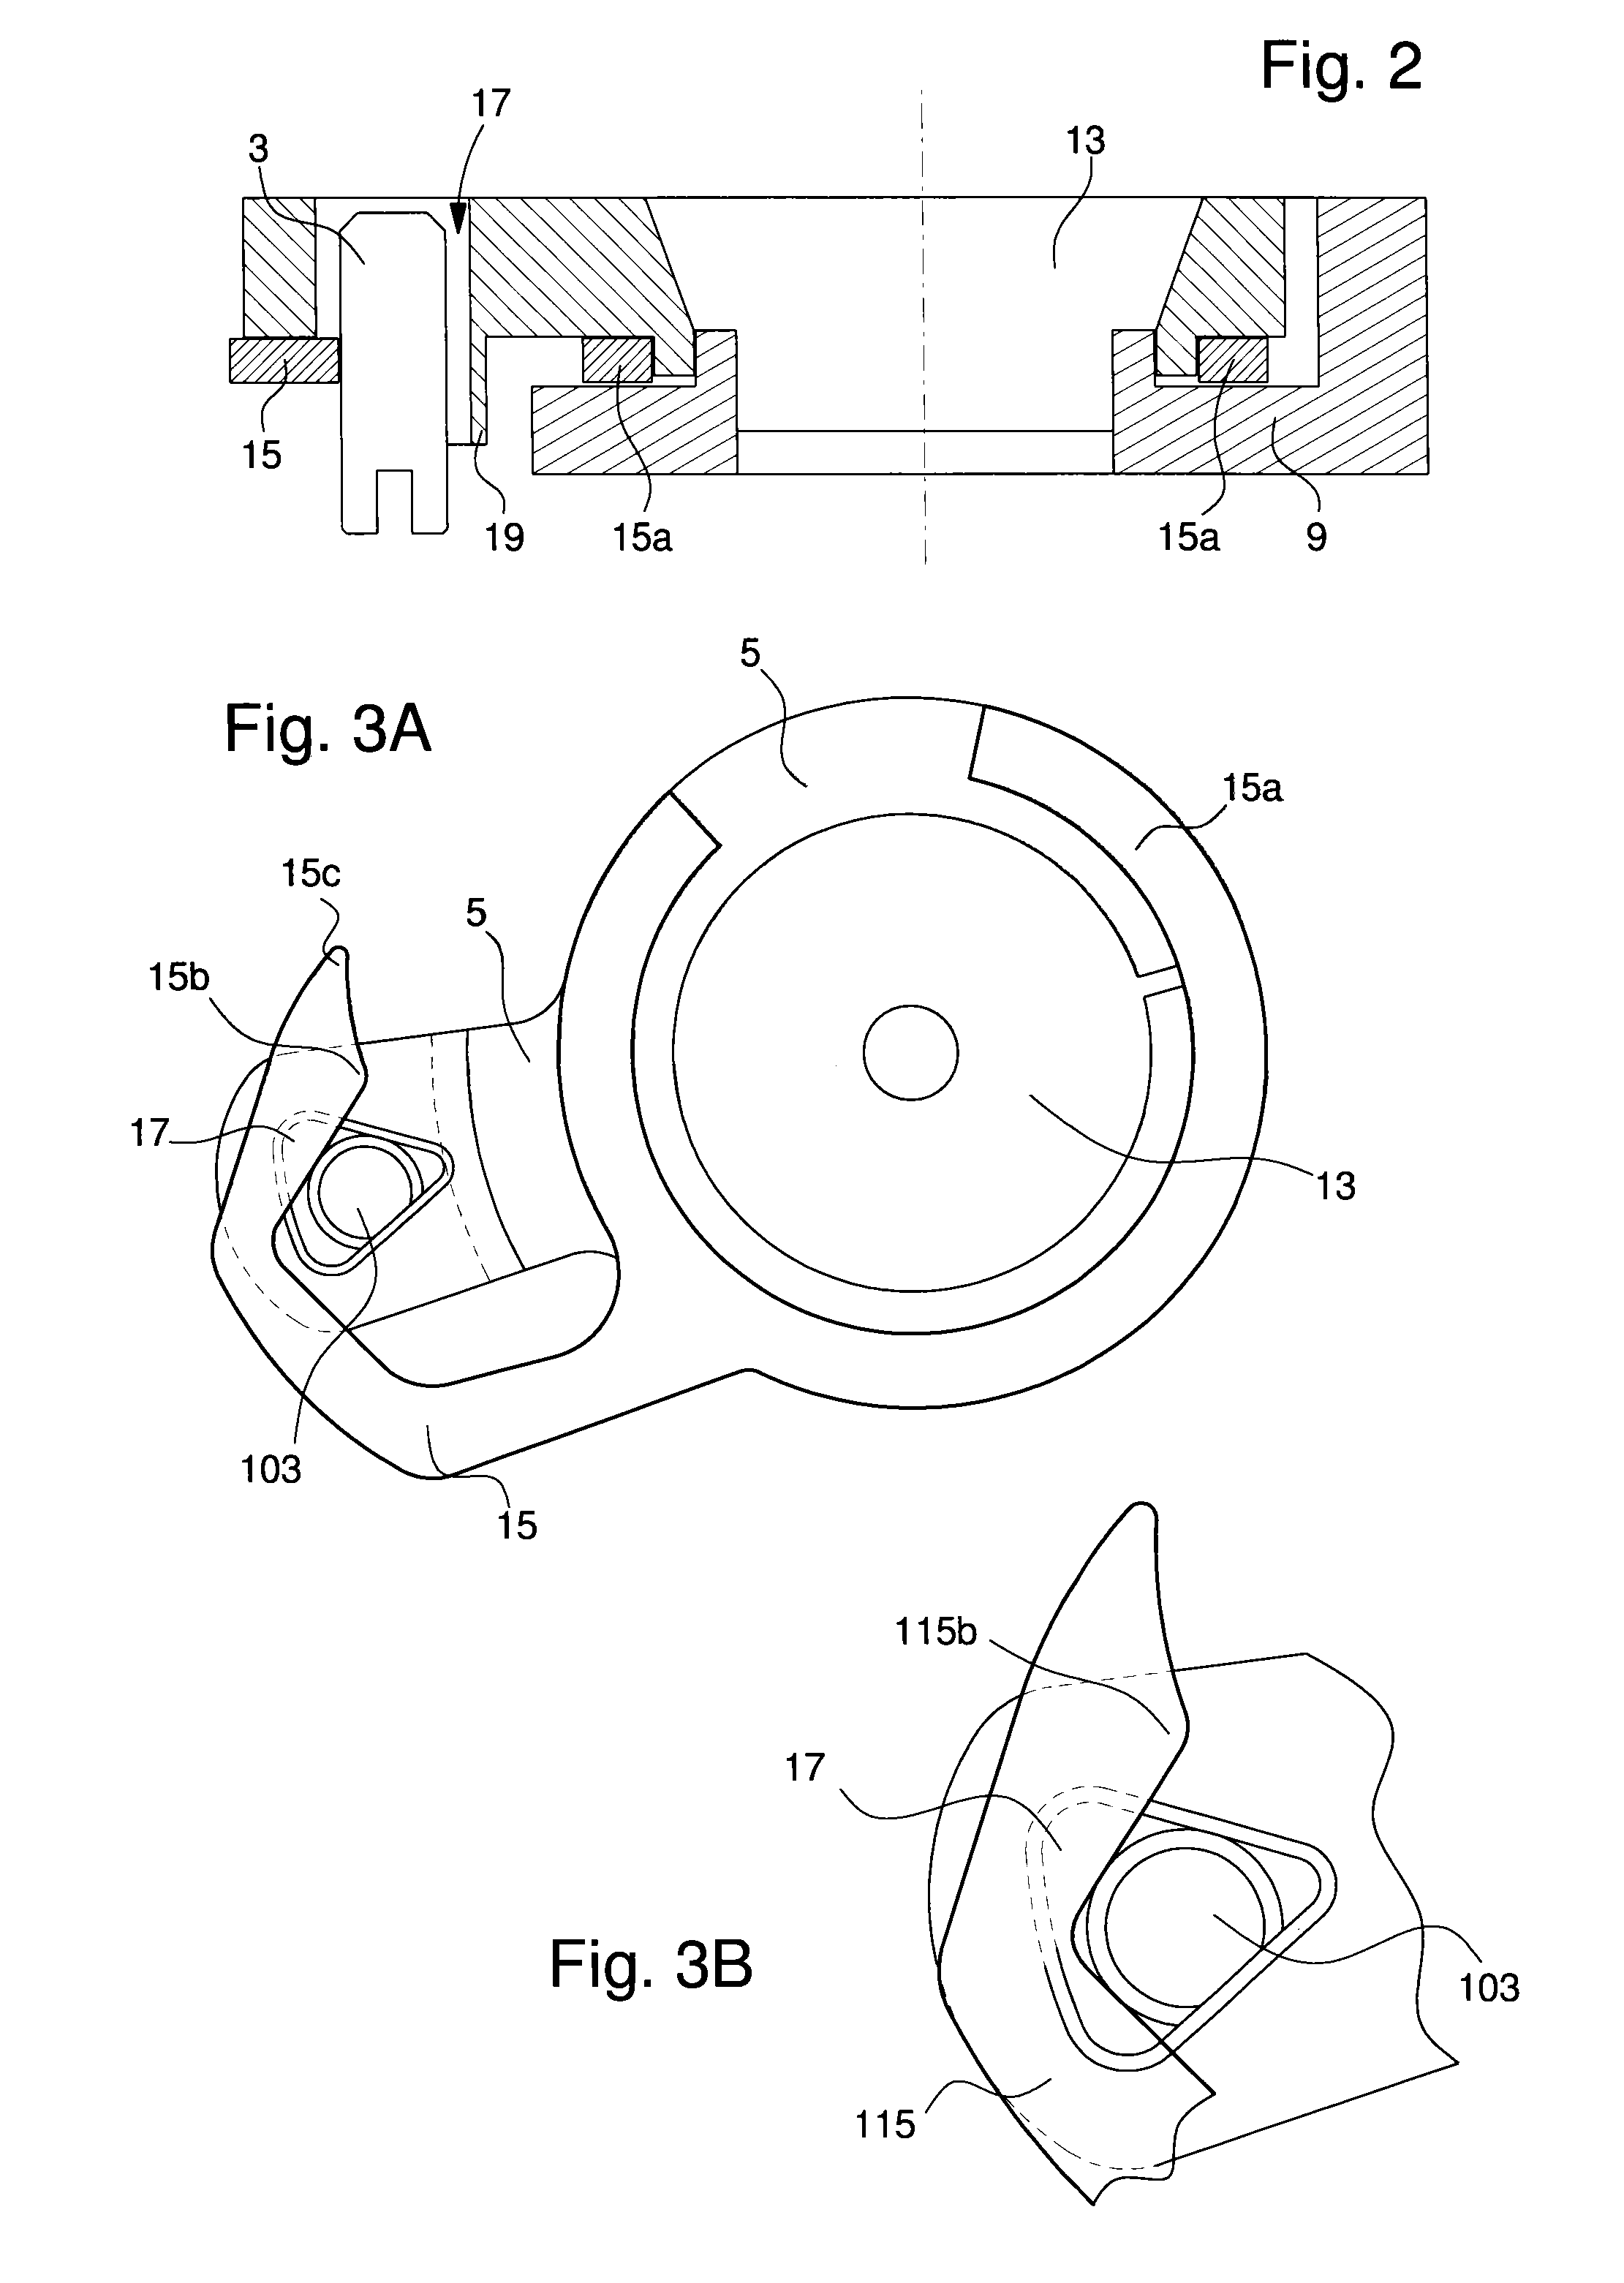 Mechanism for securing a balance spring stud to a balance bridge and sprung balance regulating device including such a mechanism